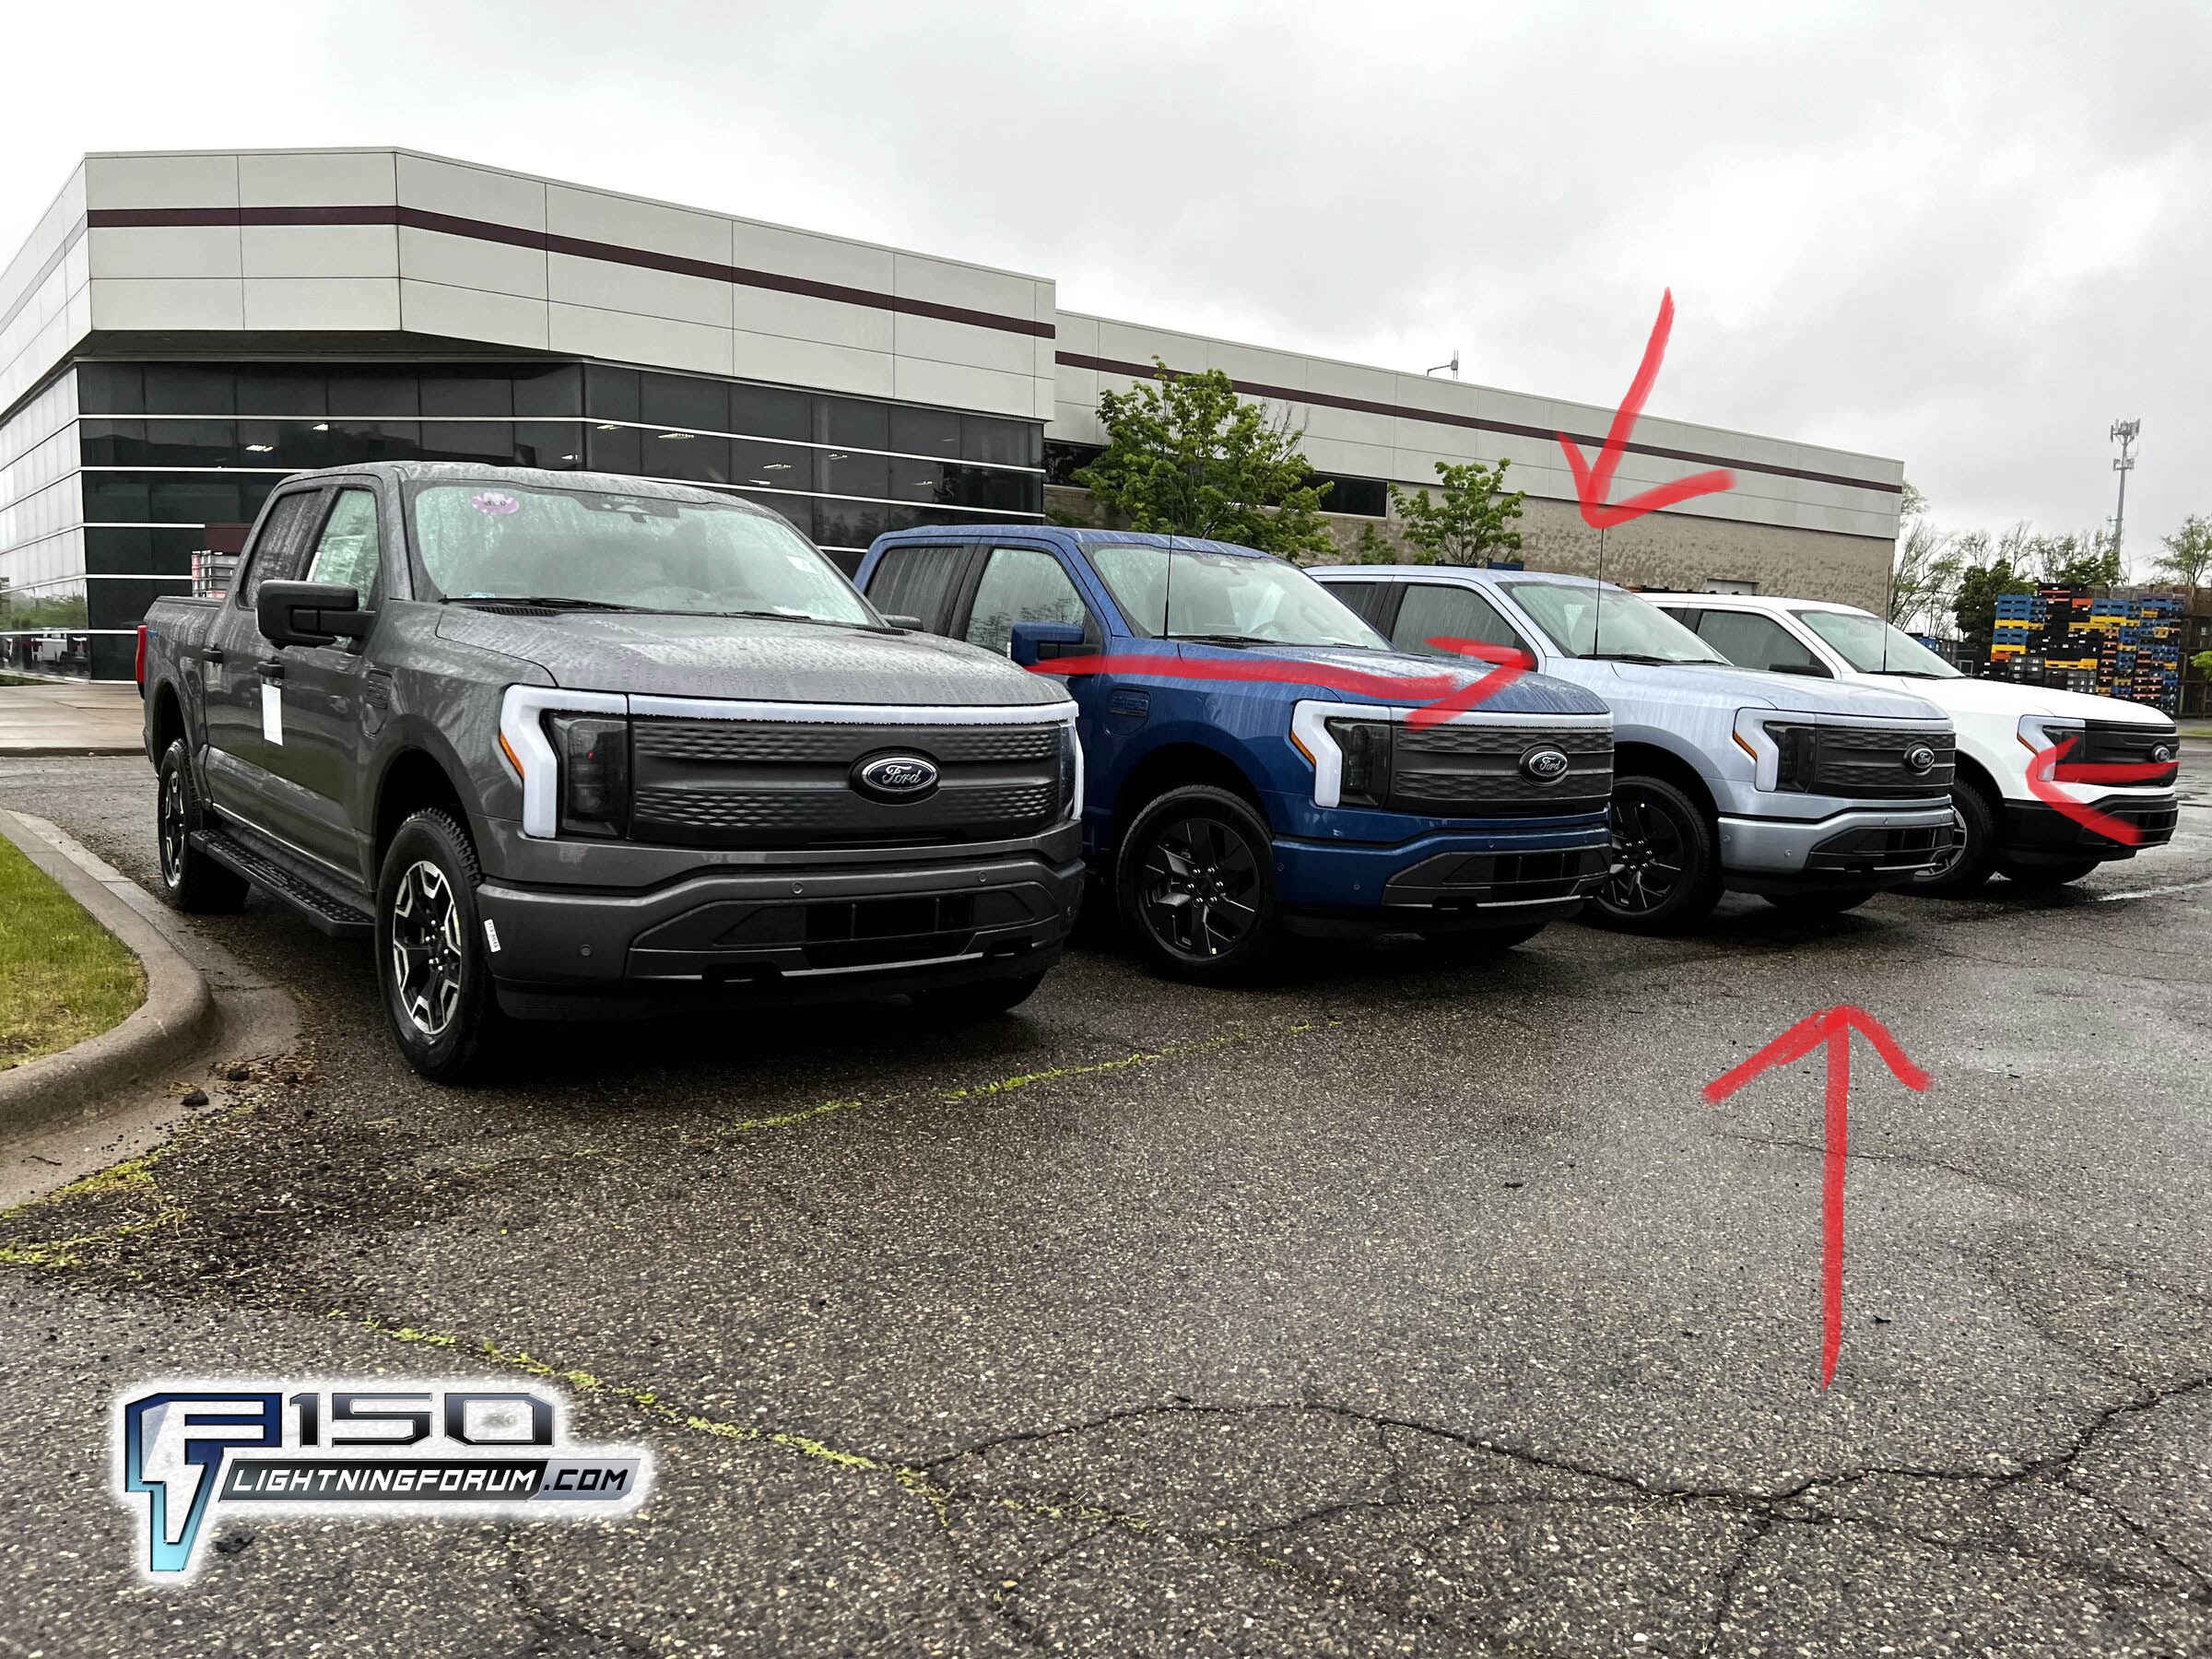 Ford F-150 Lightning Spotted: Lightnings (dealer stock orders) waiting to be transported 2A3B25F8-8864-4673-B71A-7A847FE33DAE